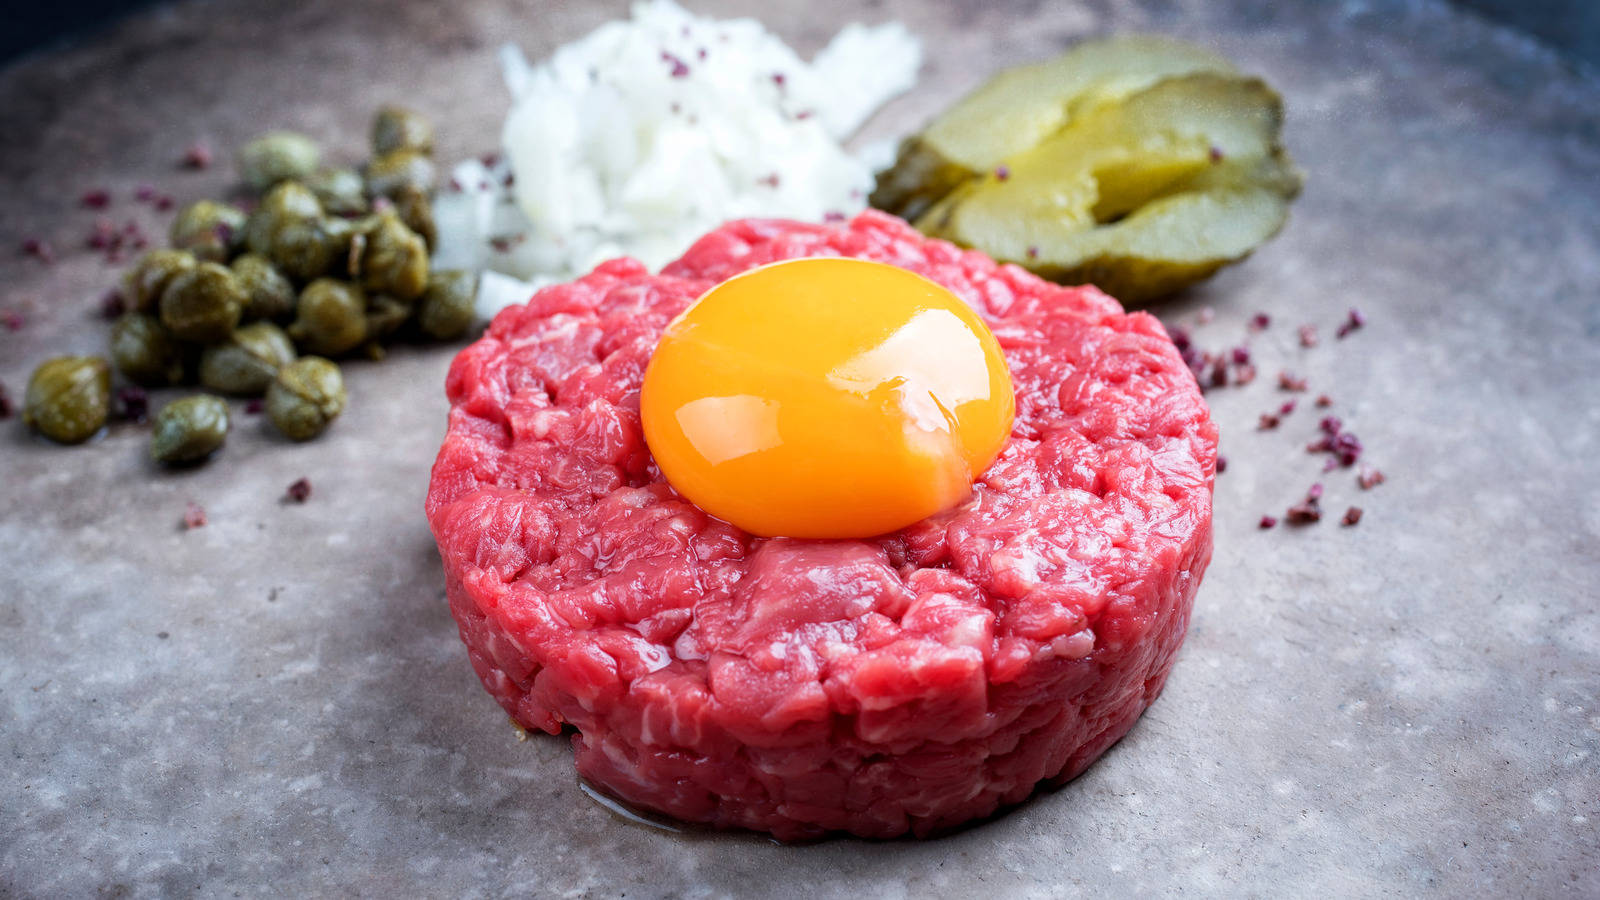 A Close-Up View of Gourmet Steak Tartare Topped With Spicy Sauce and a Fresh Raw Egg Yolk Wallpaper